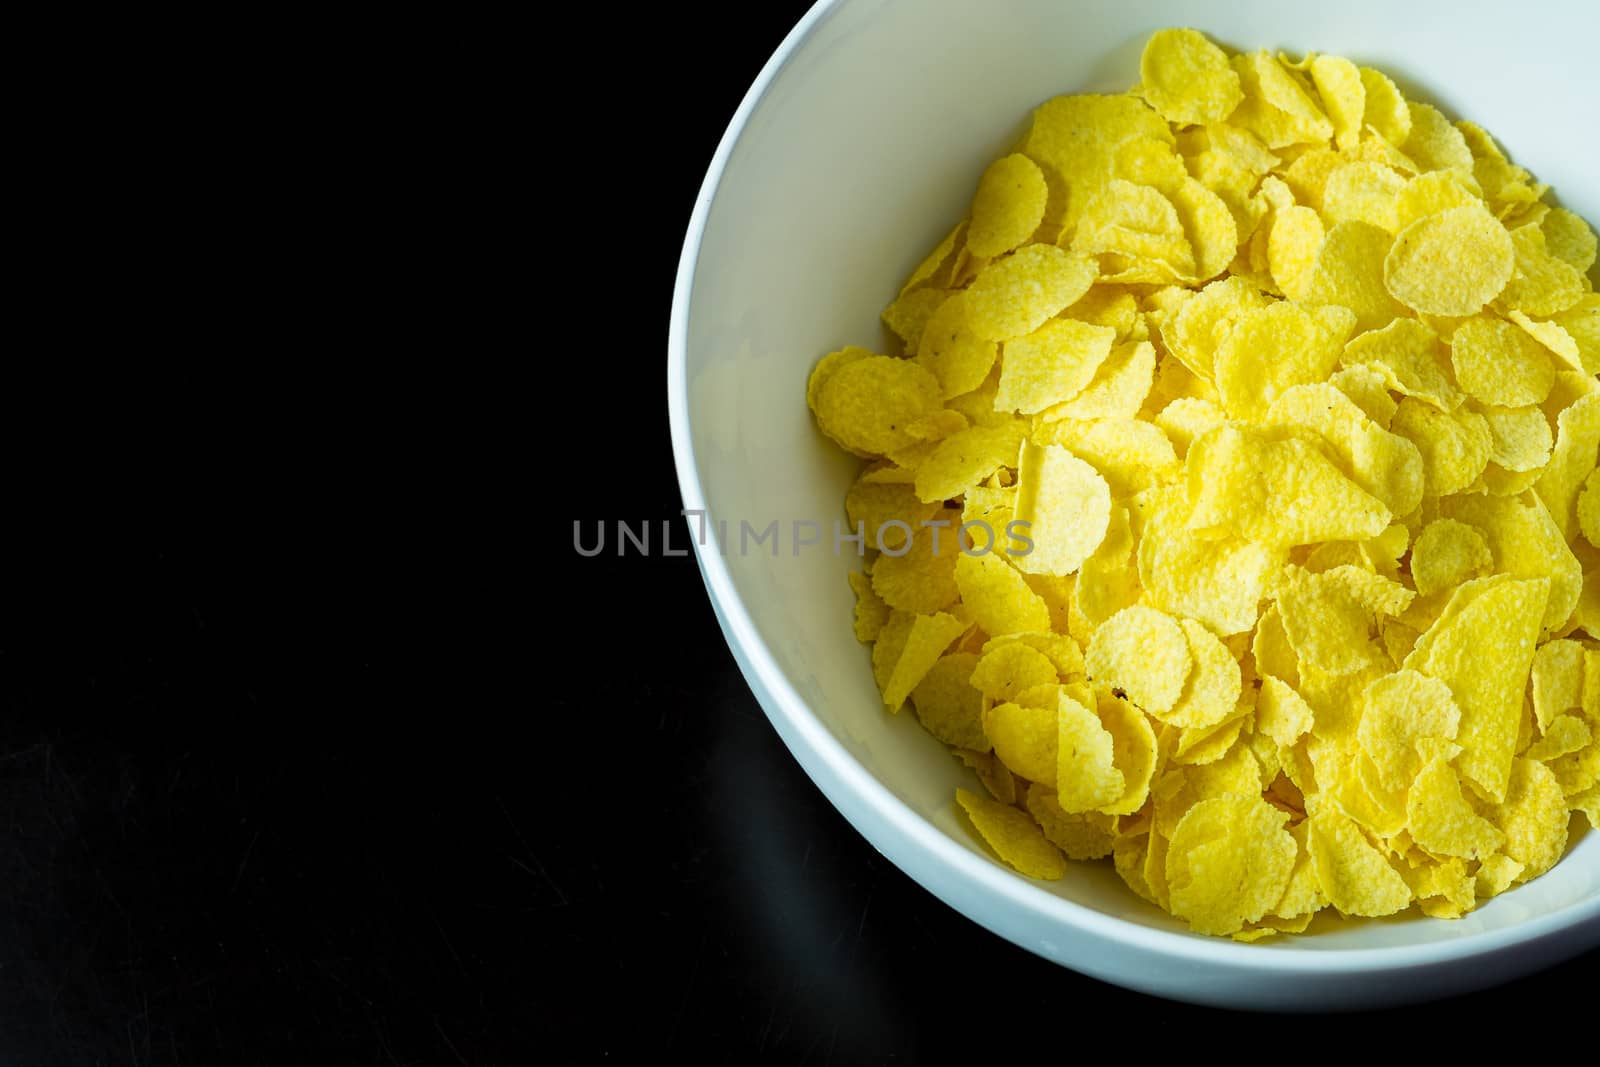 cornflakes in bowl on black table by moggara12